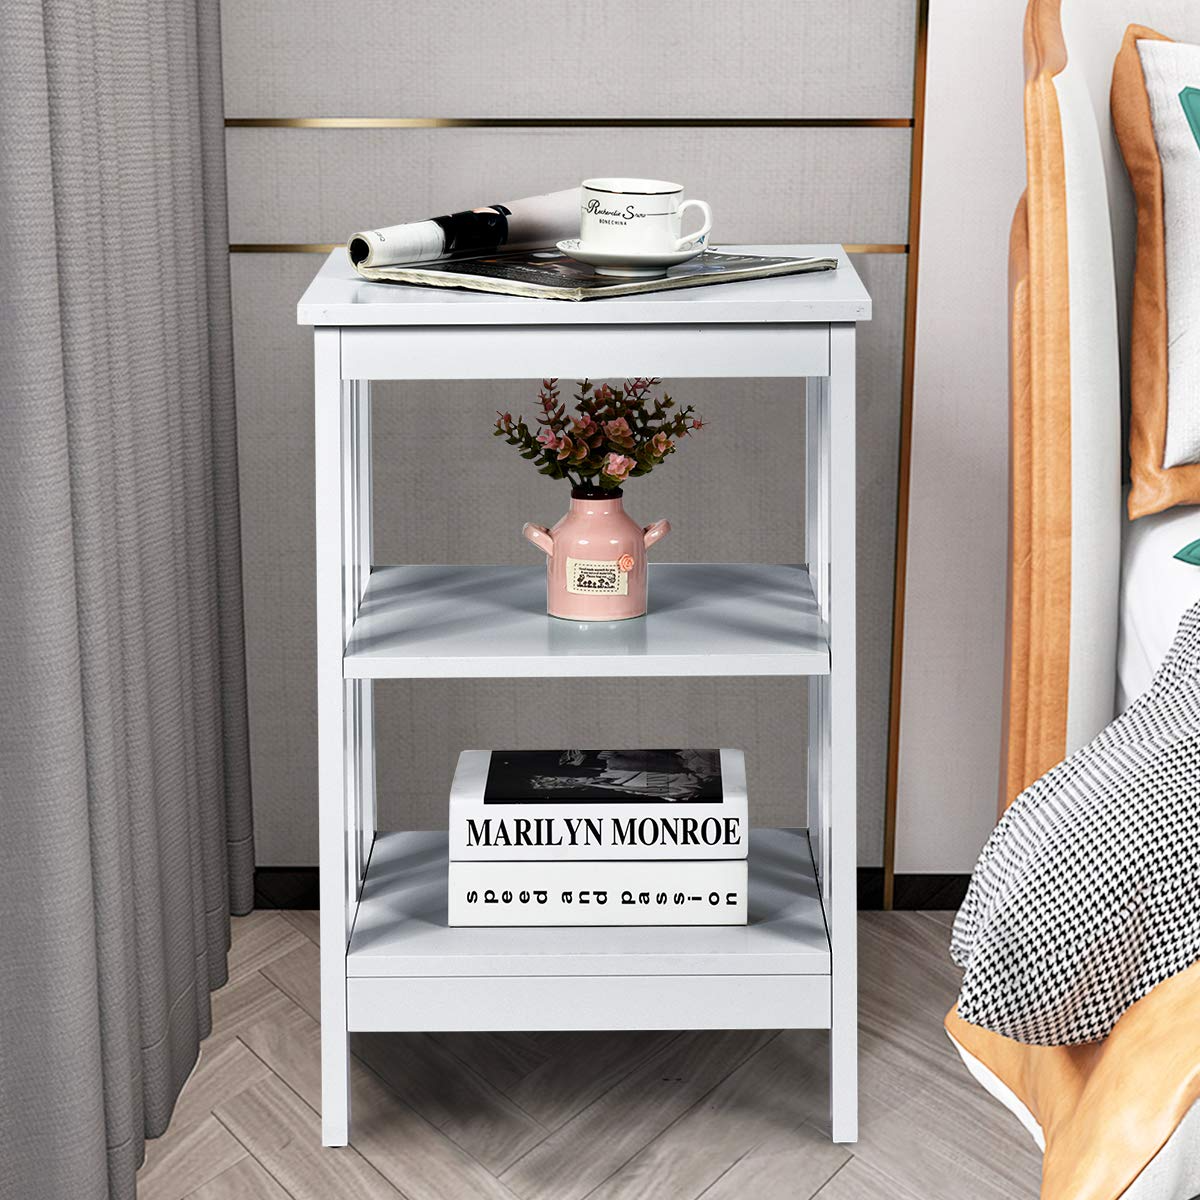 Giantex Nightstand 3-Tier Sofa Side Table W/Reinforced Bars and Stable Structure